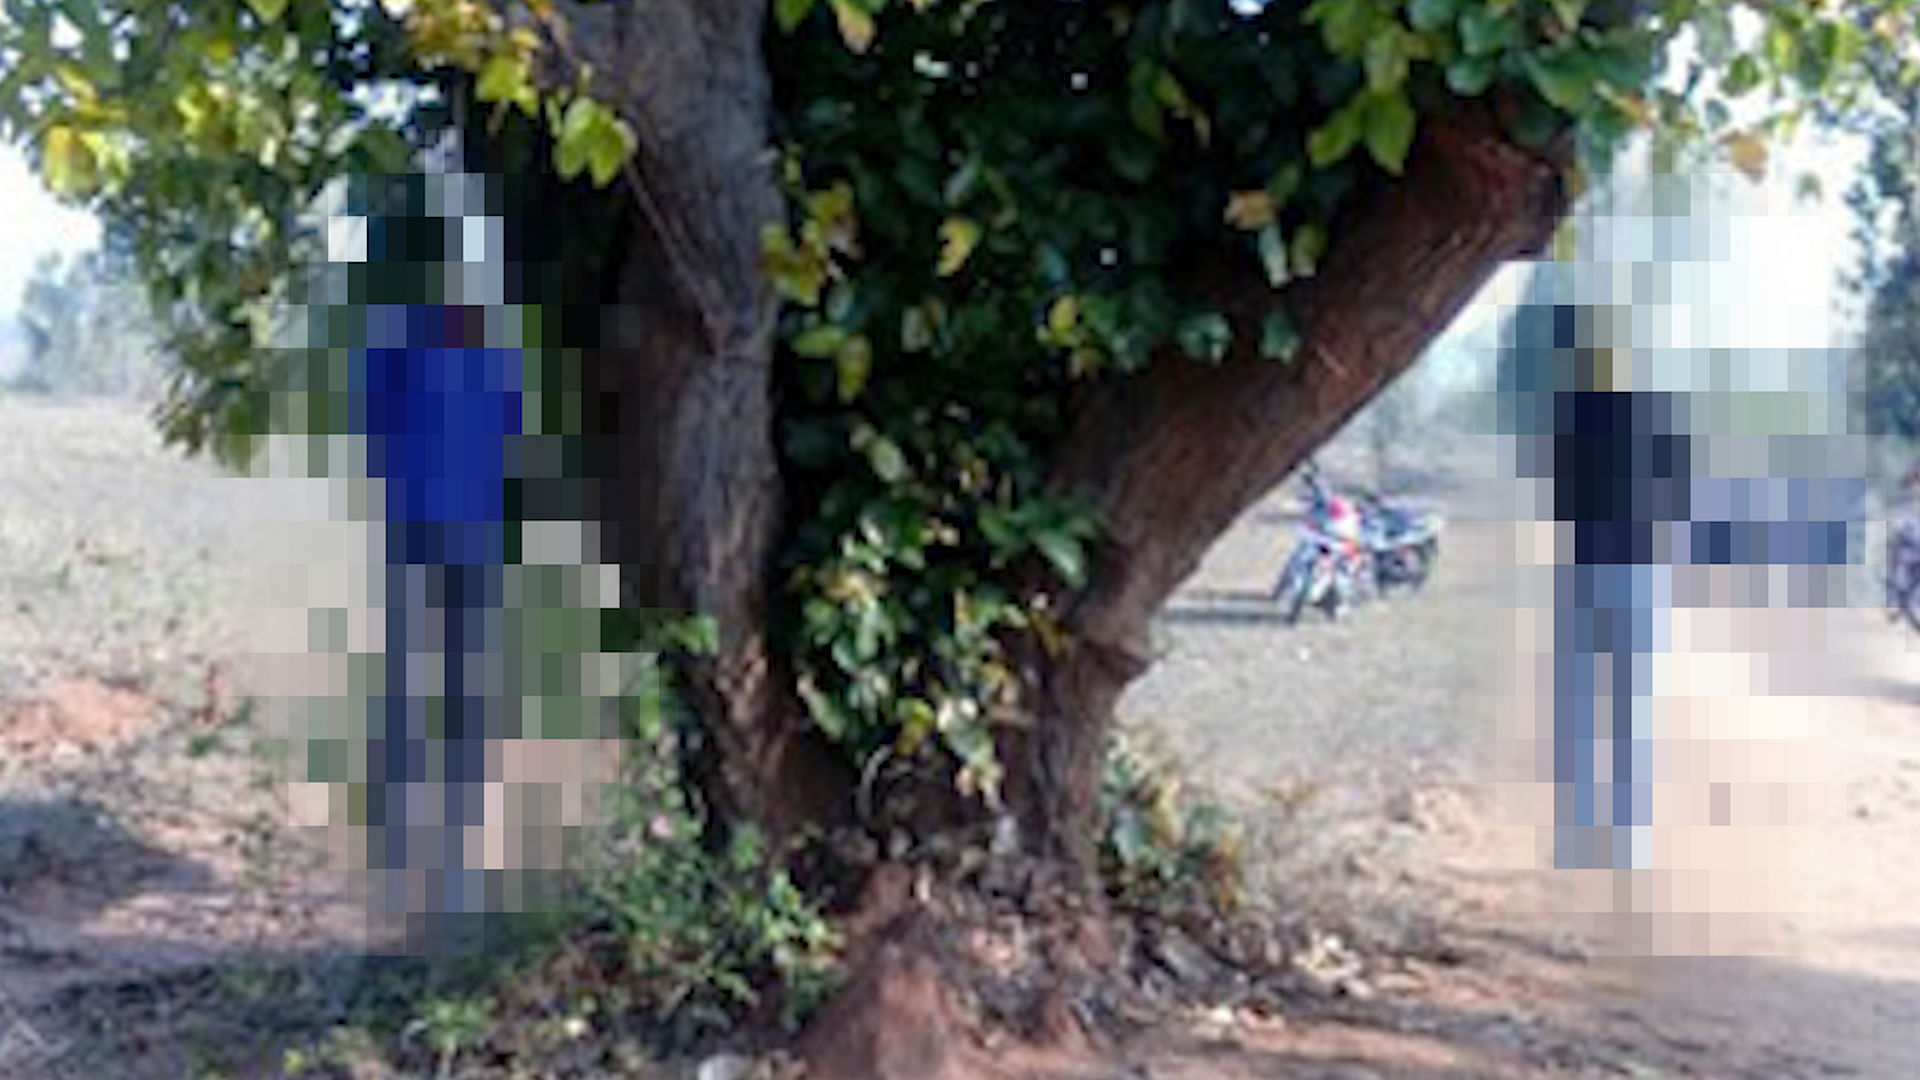 5 persons were arrested in connection with the killing of two persons who were found hanging from a tree in Jharkhand (Photo Courtesy: <a href="http://m.greaterkashmir.com/news/national/hindu-radicals-torture-hang-to-death-two-muslim-cattle-traders-in-jharkhand/212288.html">Greater Kashmir</a>)